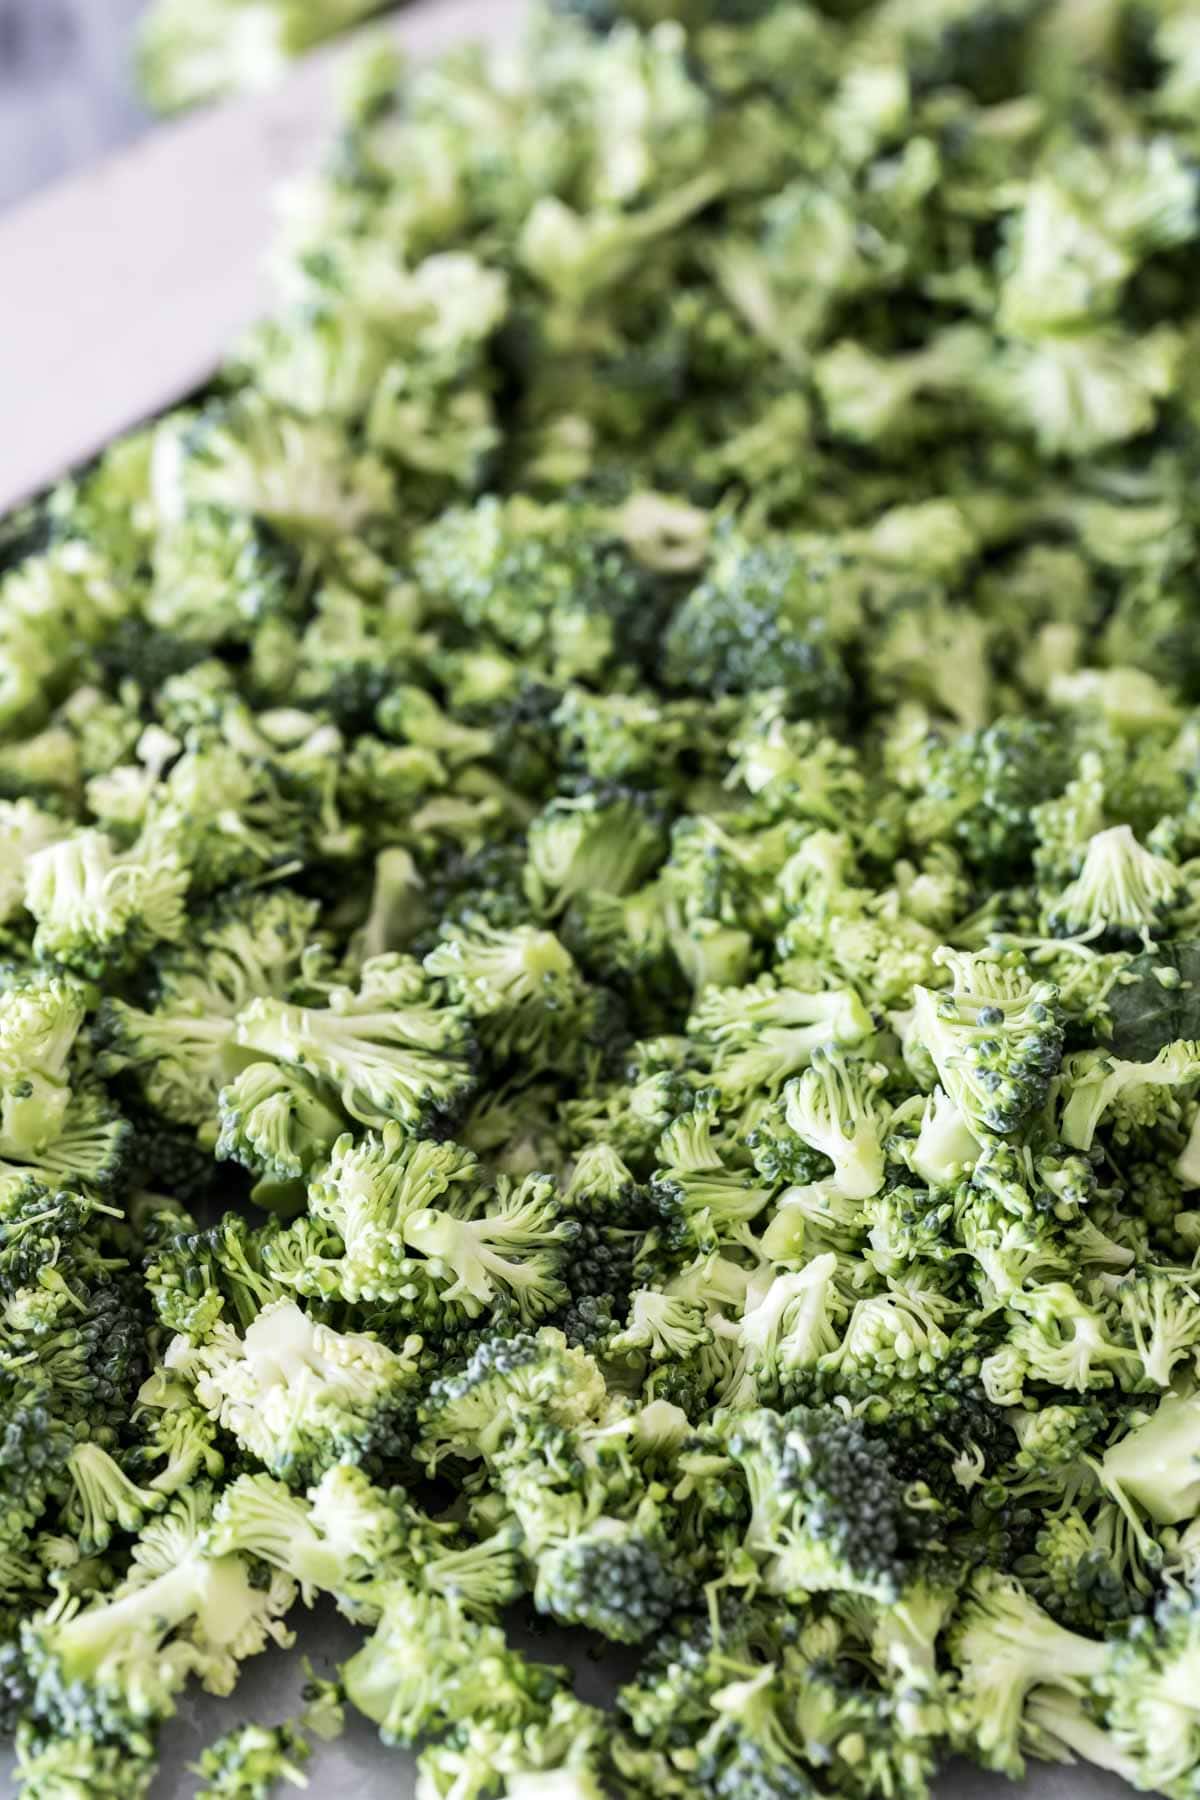 Close-up view of chopped broccoli bits.